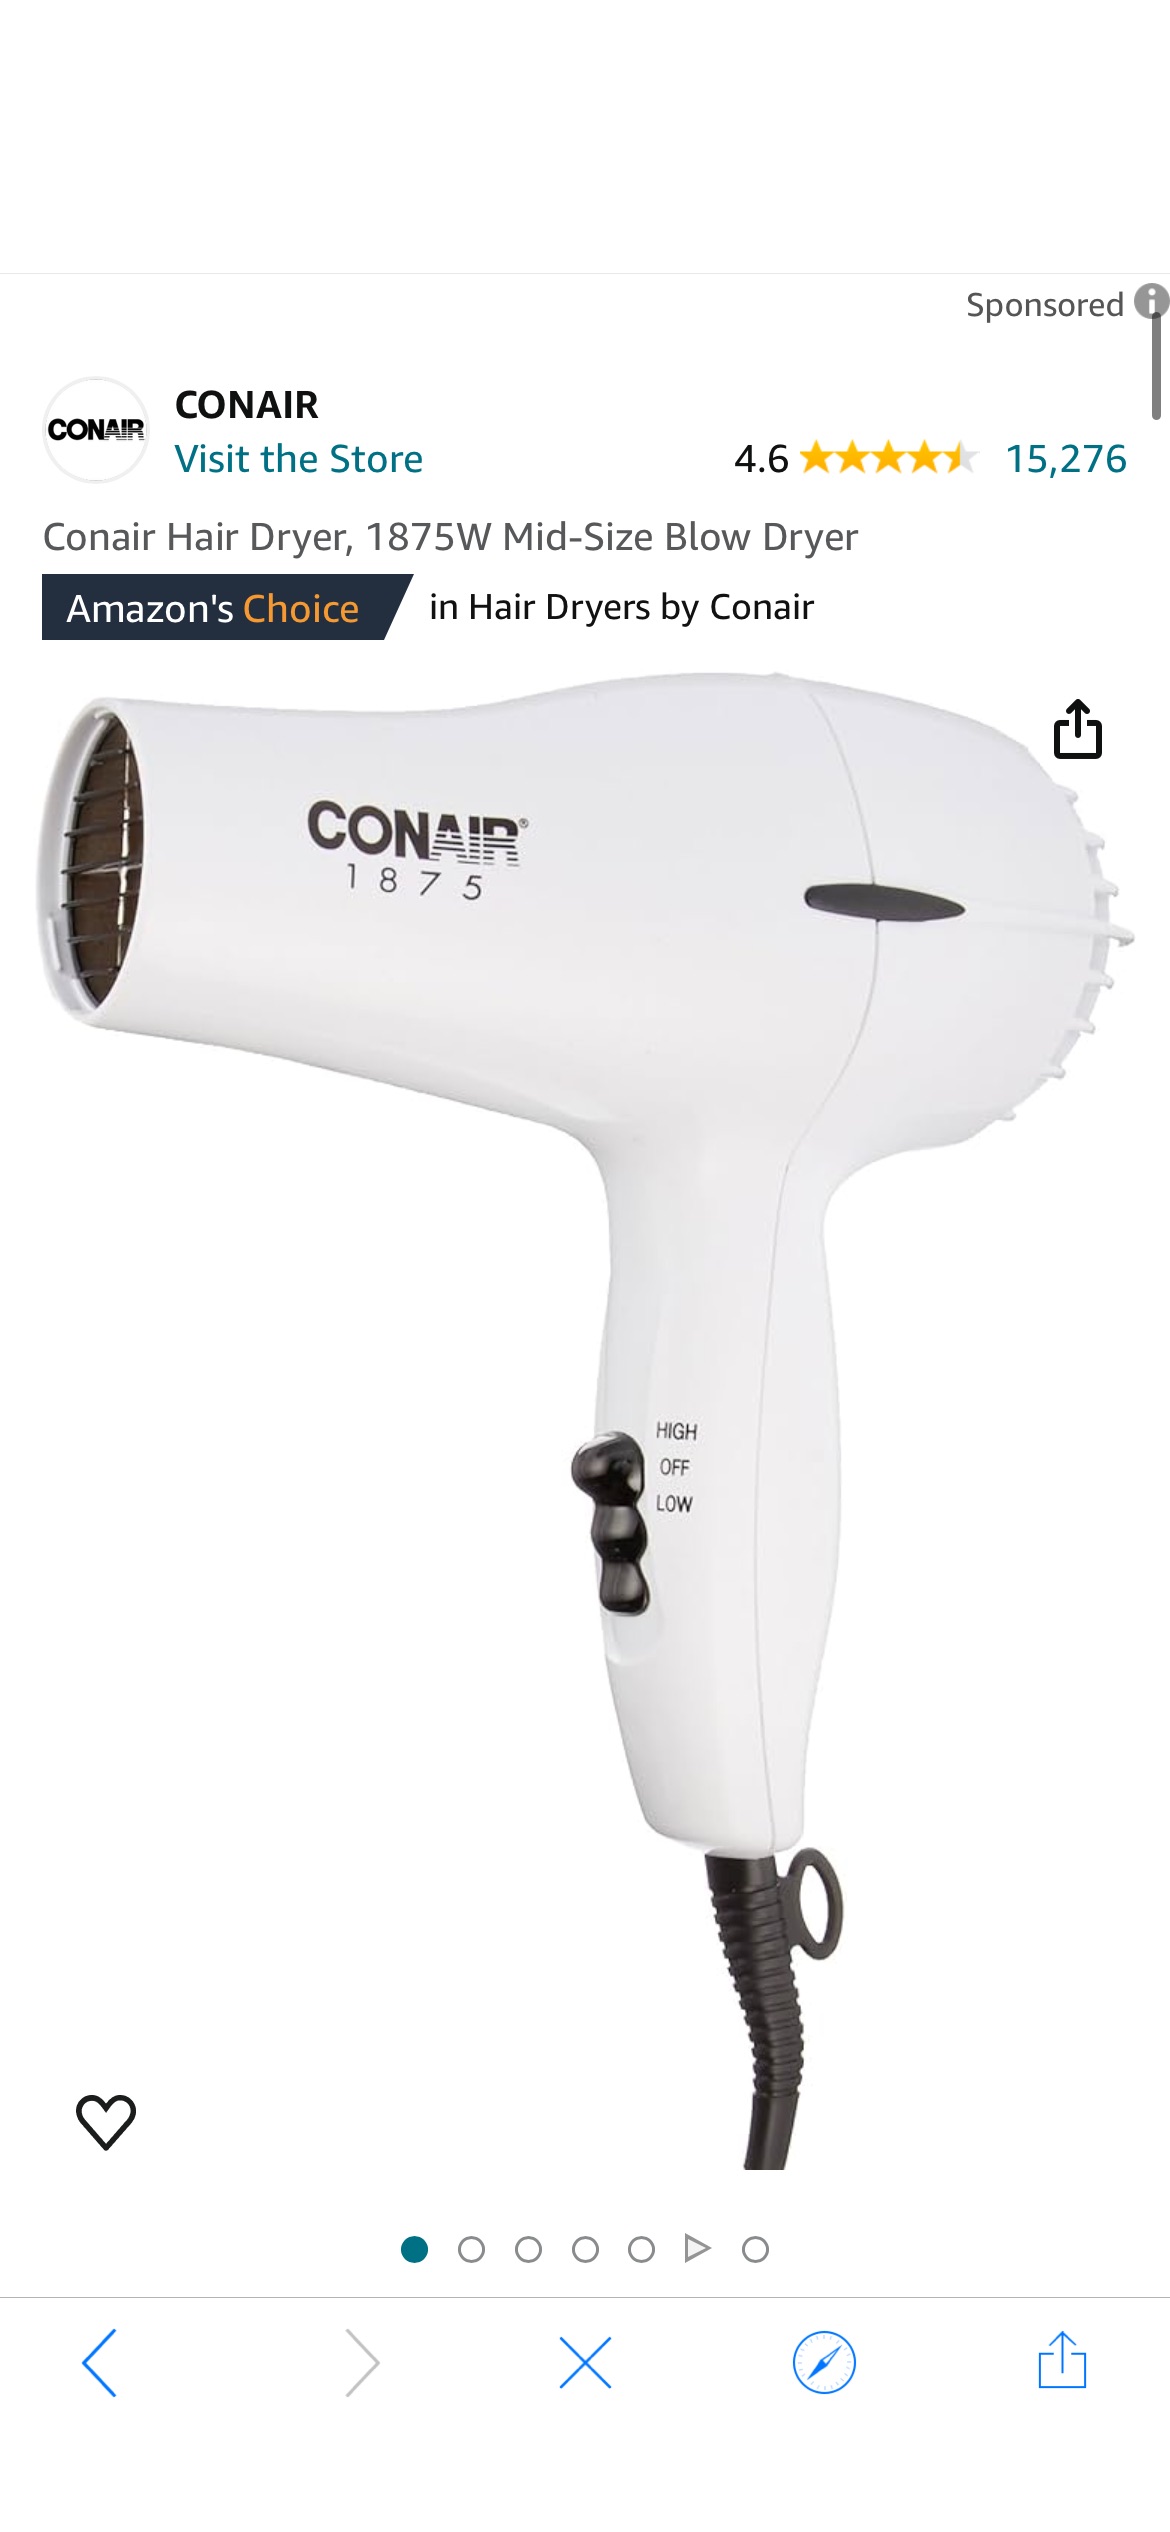 Amazon.com : Conair Hair Dryer, 1875W Mid-Size Blow Dryer : Beauty & Personal Care